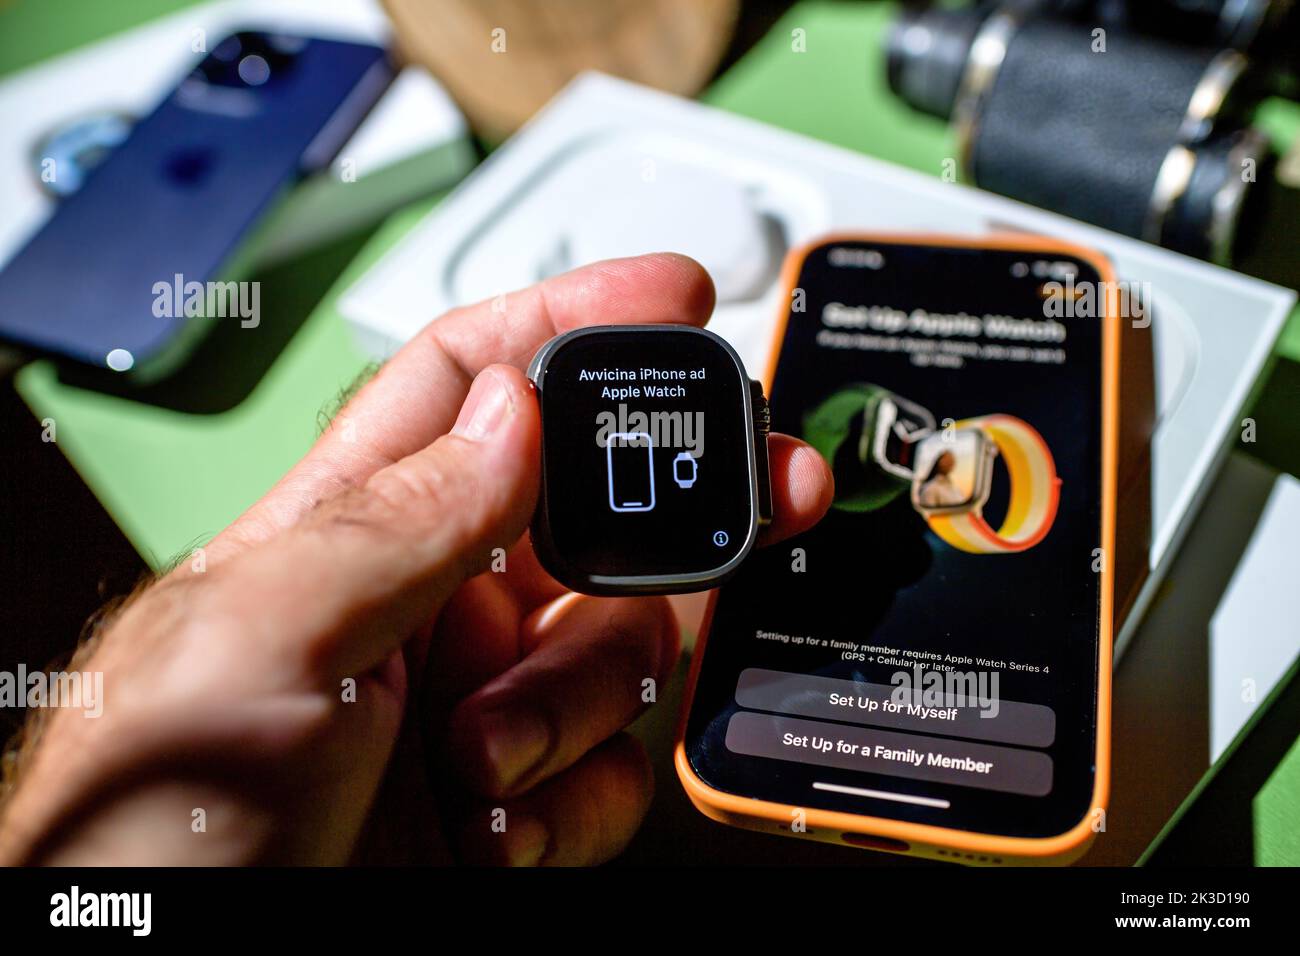 London, United Kingdom - Sep 23, 2022: bring the iPhone closer to the Apple Watch translation from italian avvicina iPhone ad Apple watch during setup of ew titanium Apple Watch Ultra designed for extreme activities like endurance sports, elite athletes, trailblazing, adventure Stock Photo